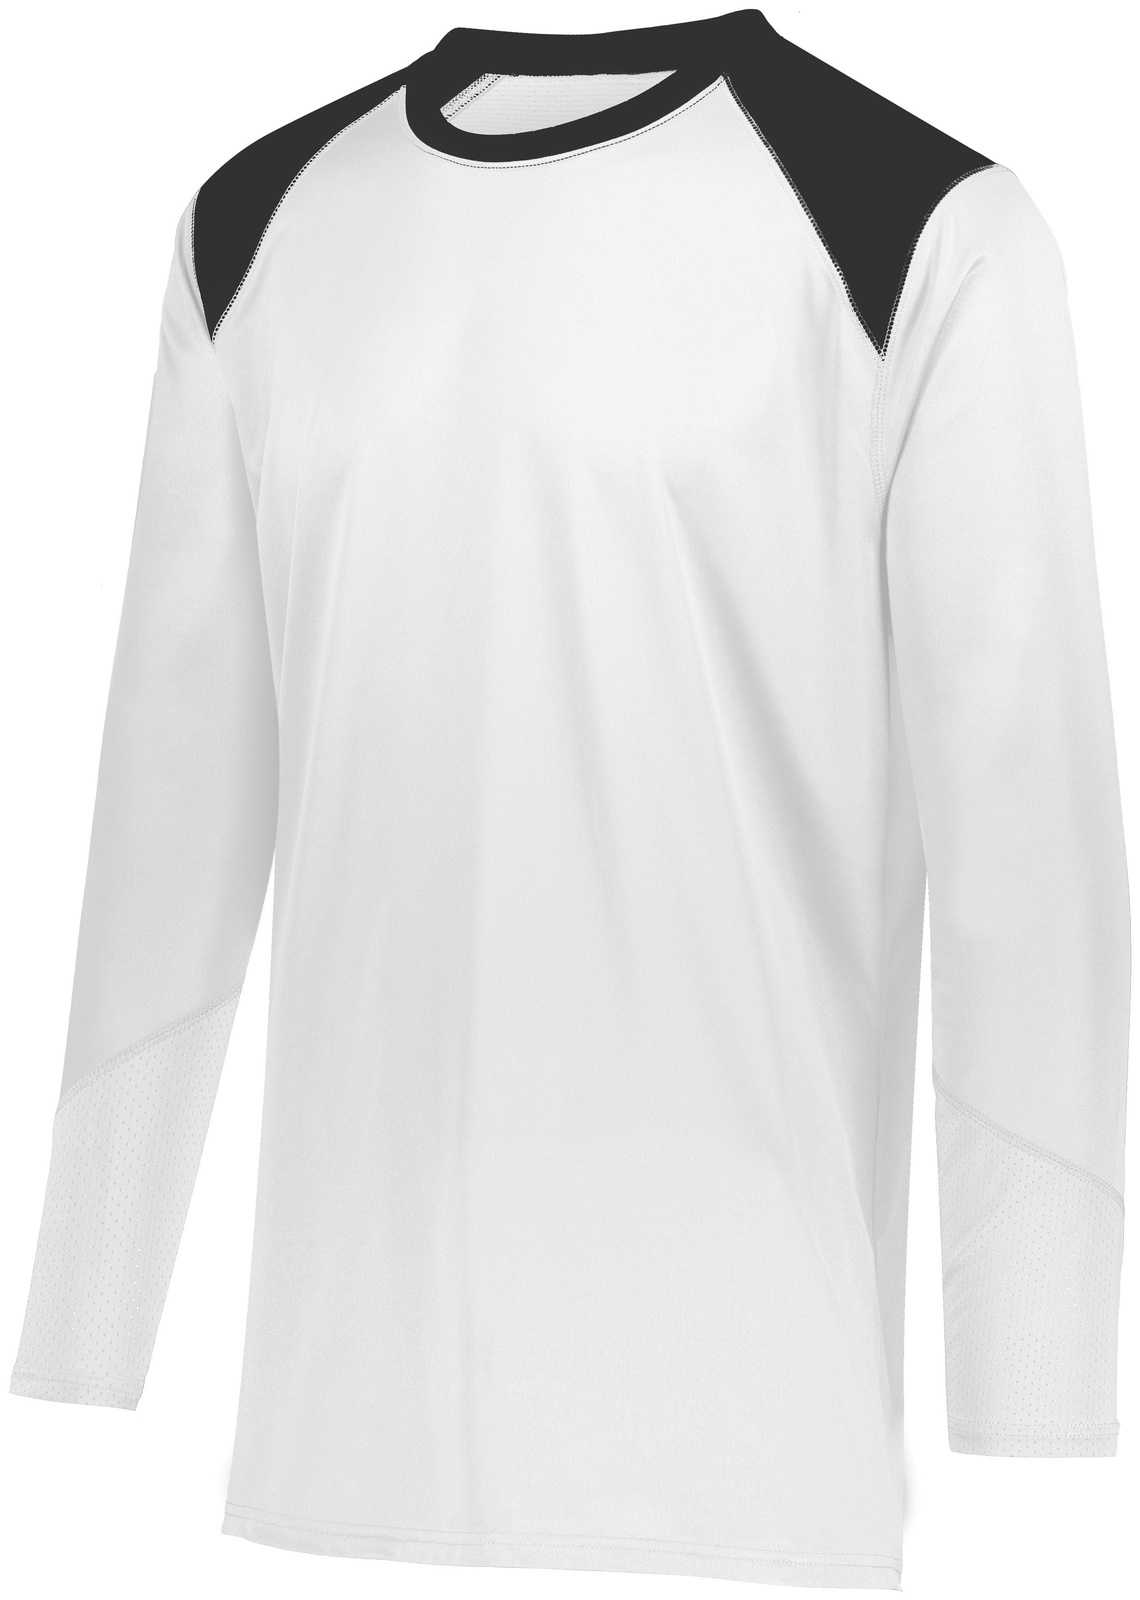 Augusta 1729 Youth Tip-Off Shooter Shirt - White Black - HIT a Double